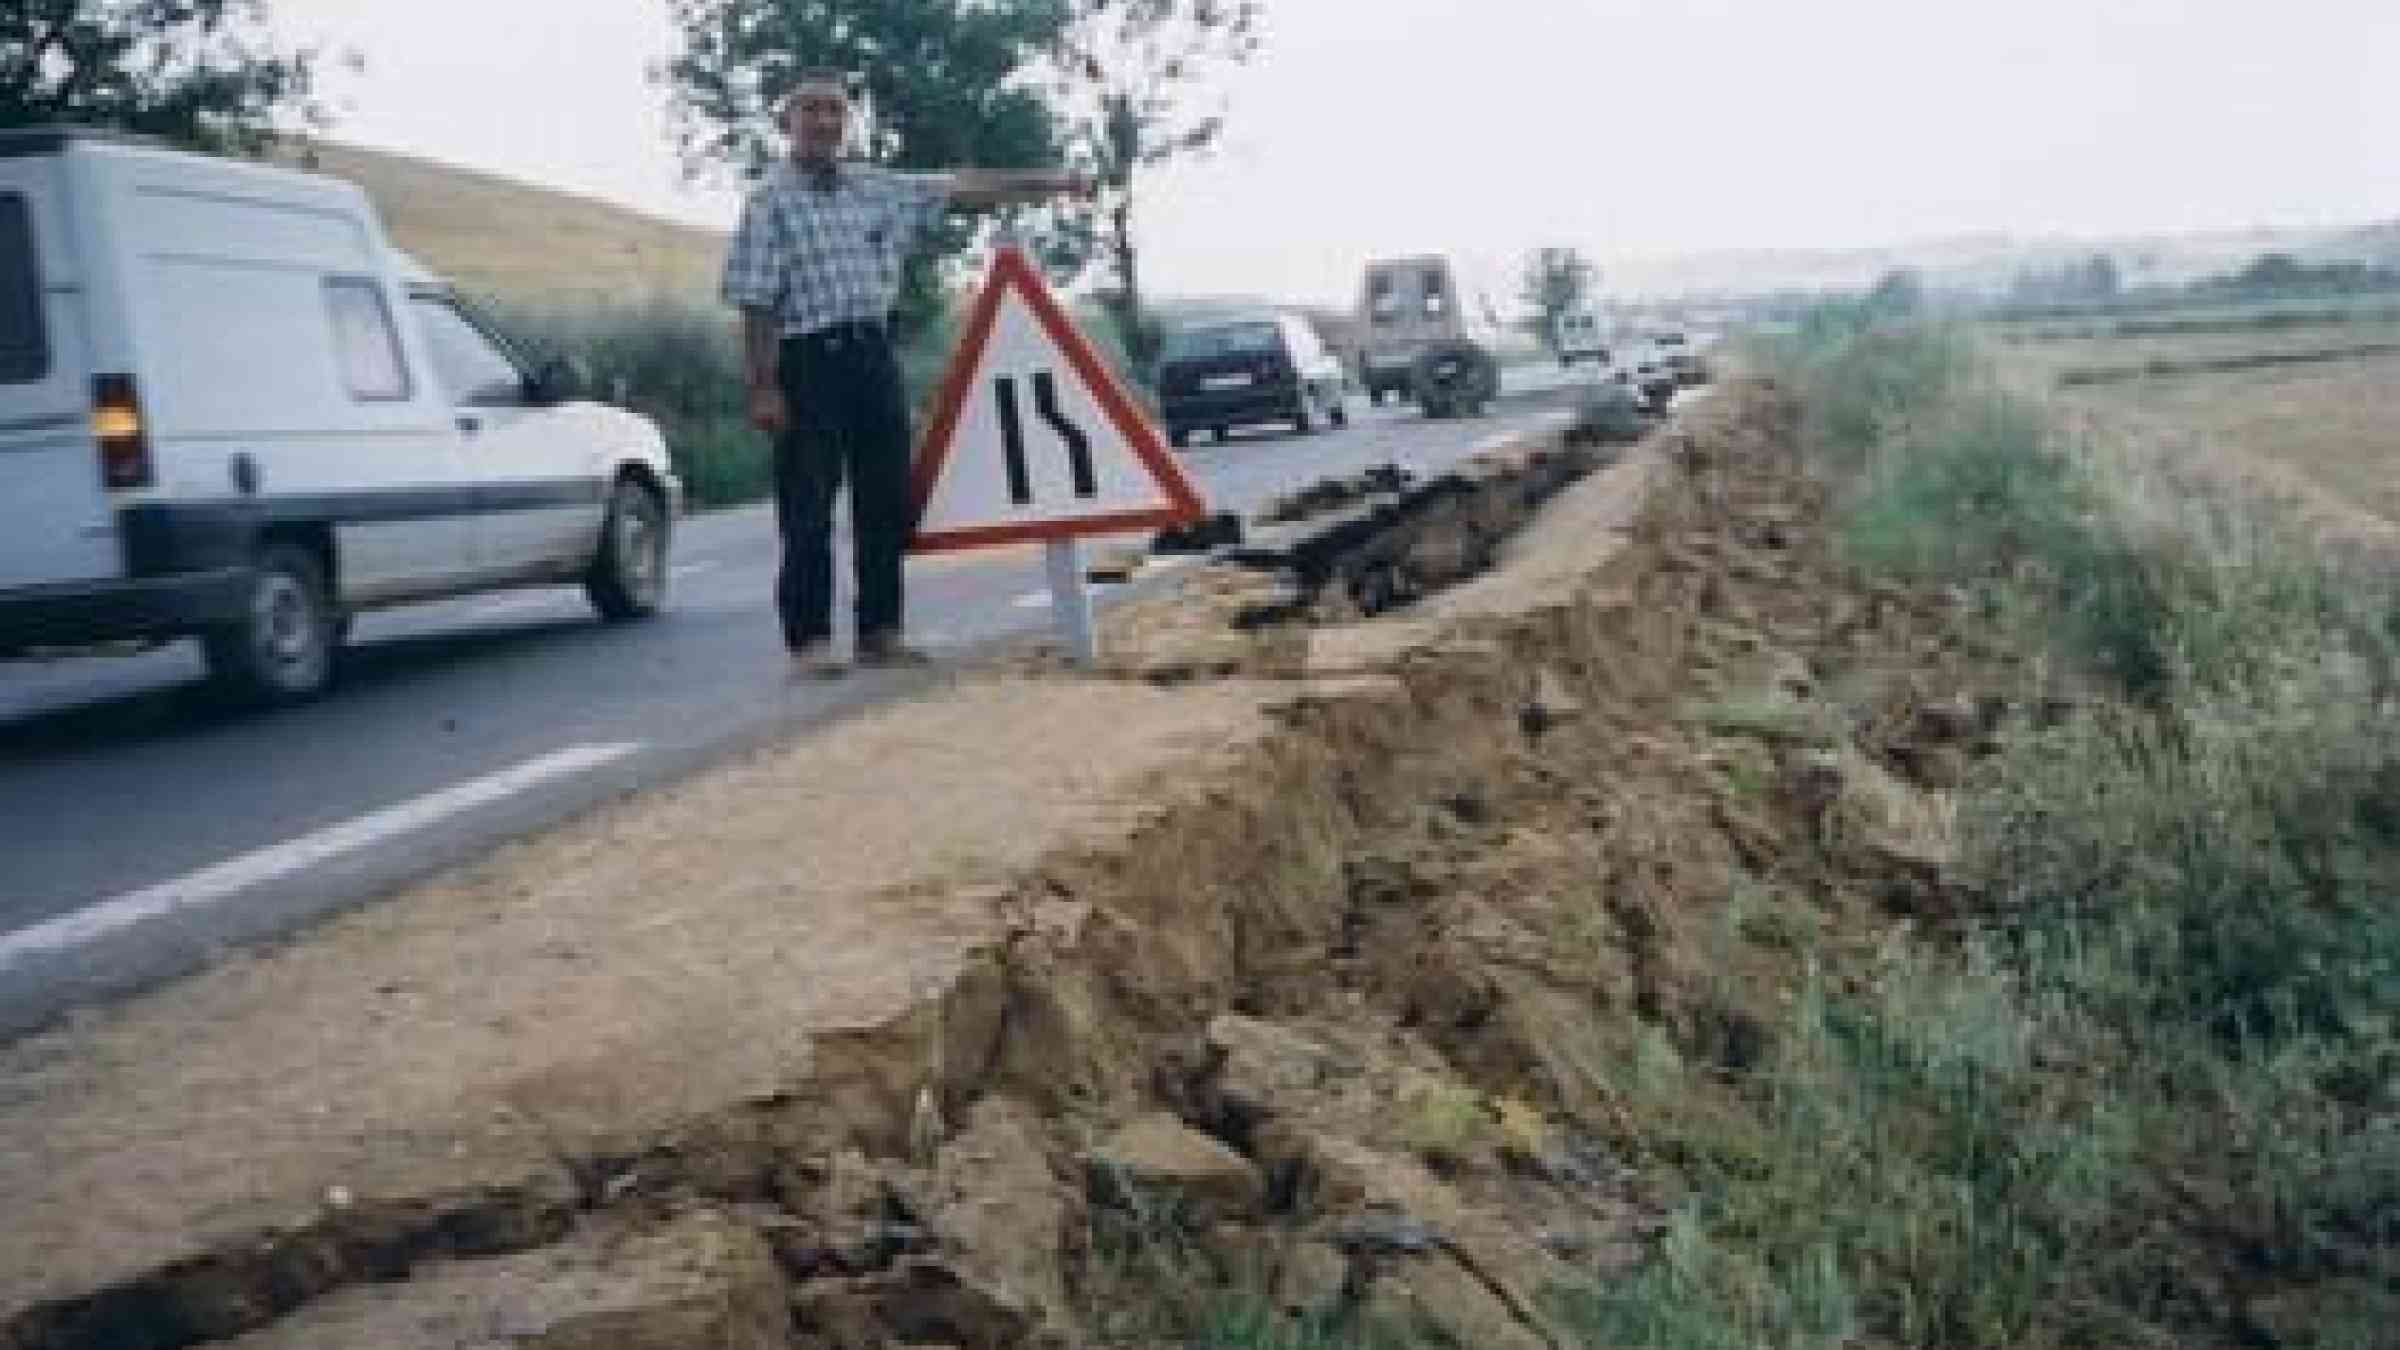 Slumps and cracks in a road near Algiers following a destructive earthquake of 6.8 magnitude that hit the region of Boumerdes and Algiers on May 21, 2003. Since then, Algeria passed Law 04-20 making disaster risk management a national priority as outlined in the HFA.